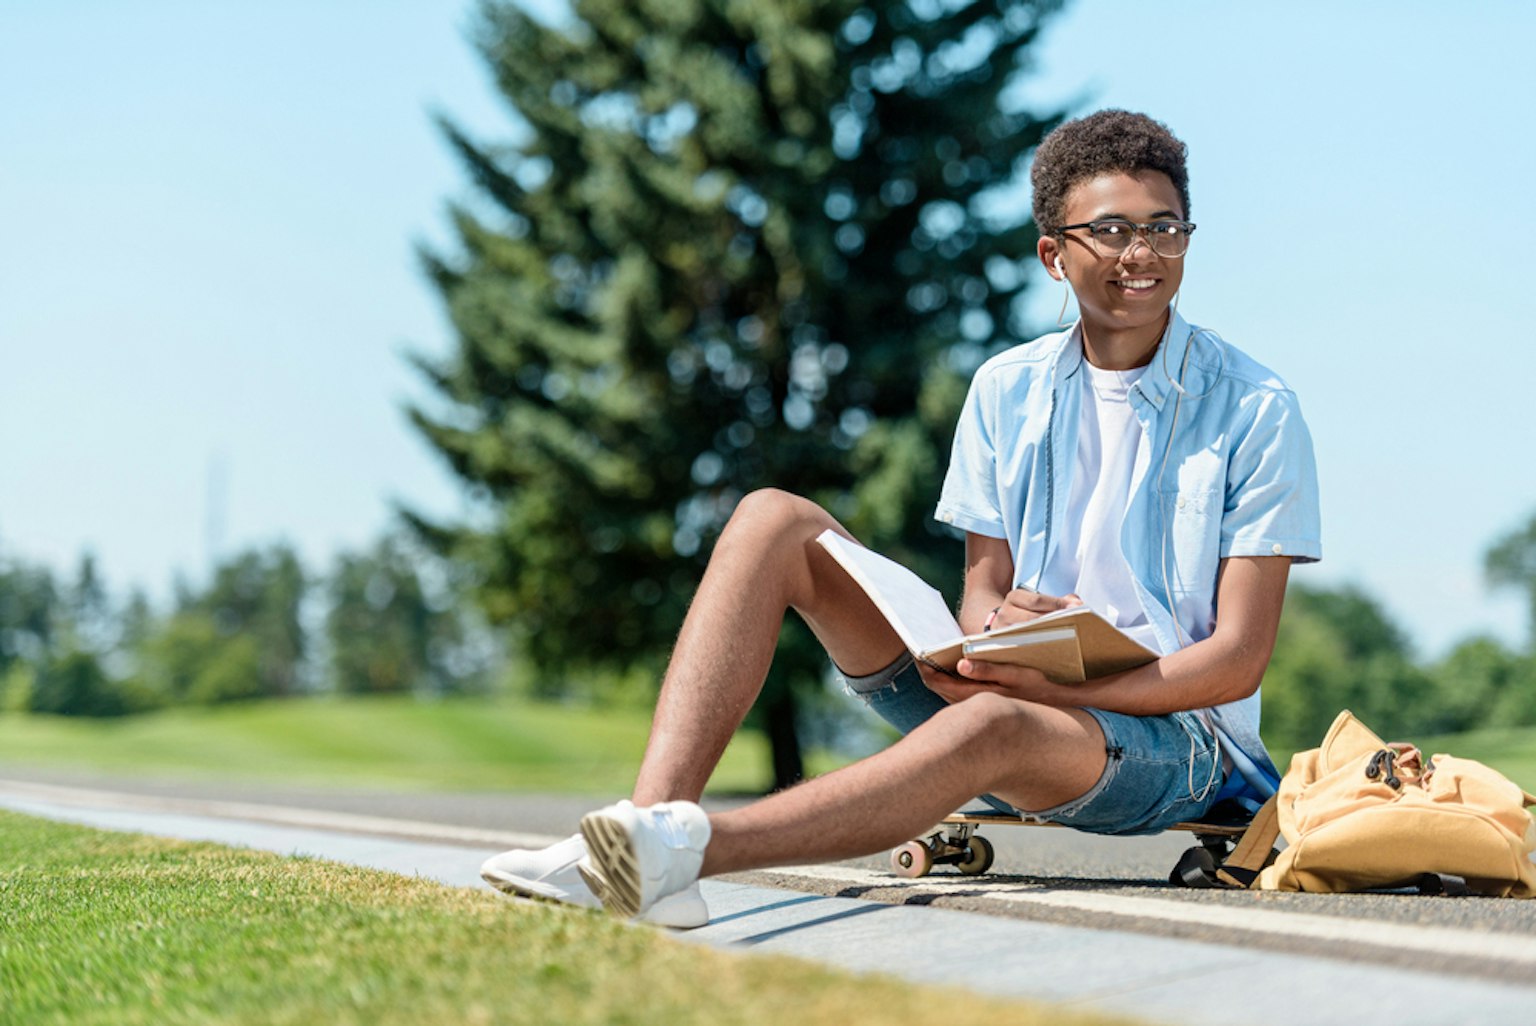 Male sitting on a skateboard while reading